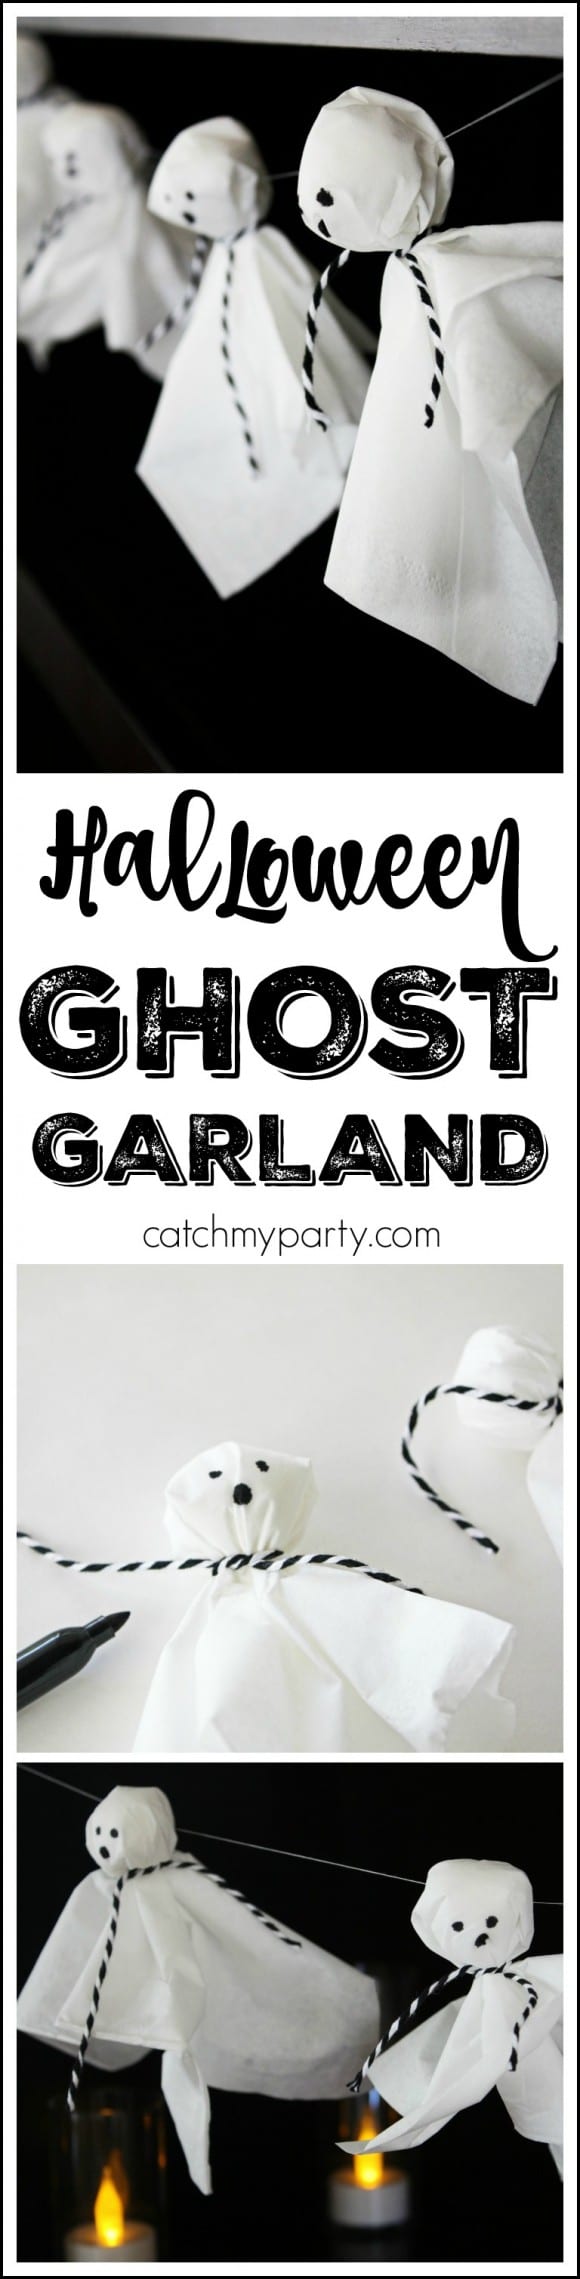 Learn to make this easy Halloween tissue ghost garland to decorate your house for Halloween! | CatchMyParty.com